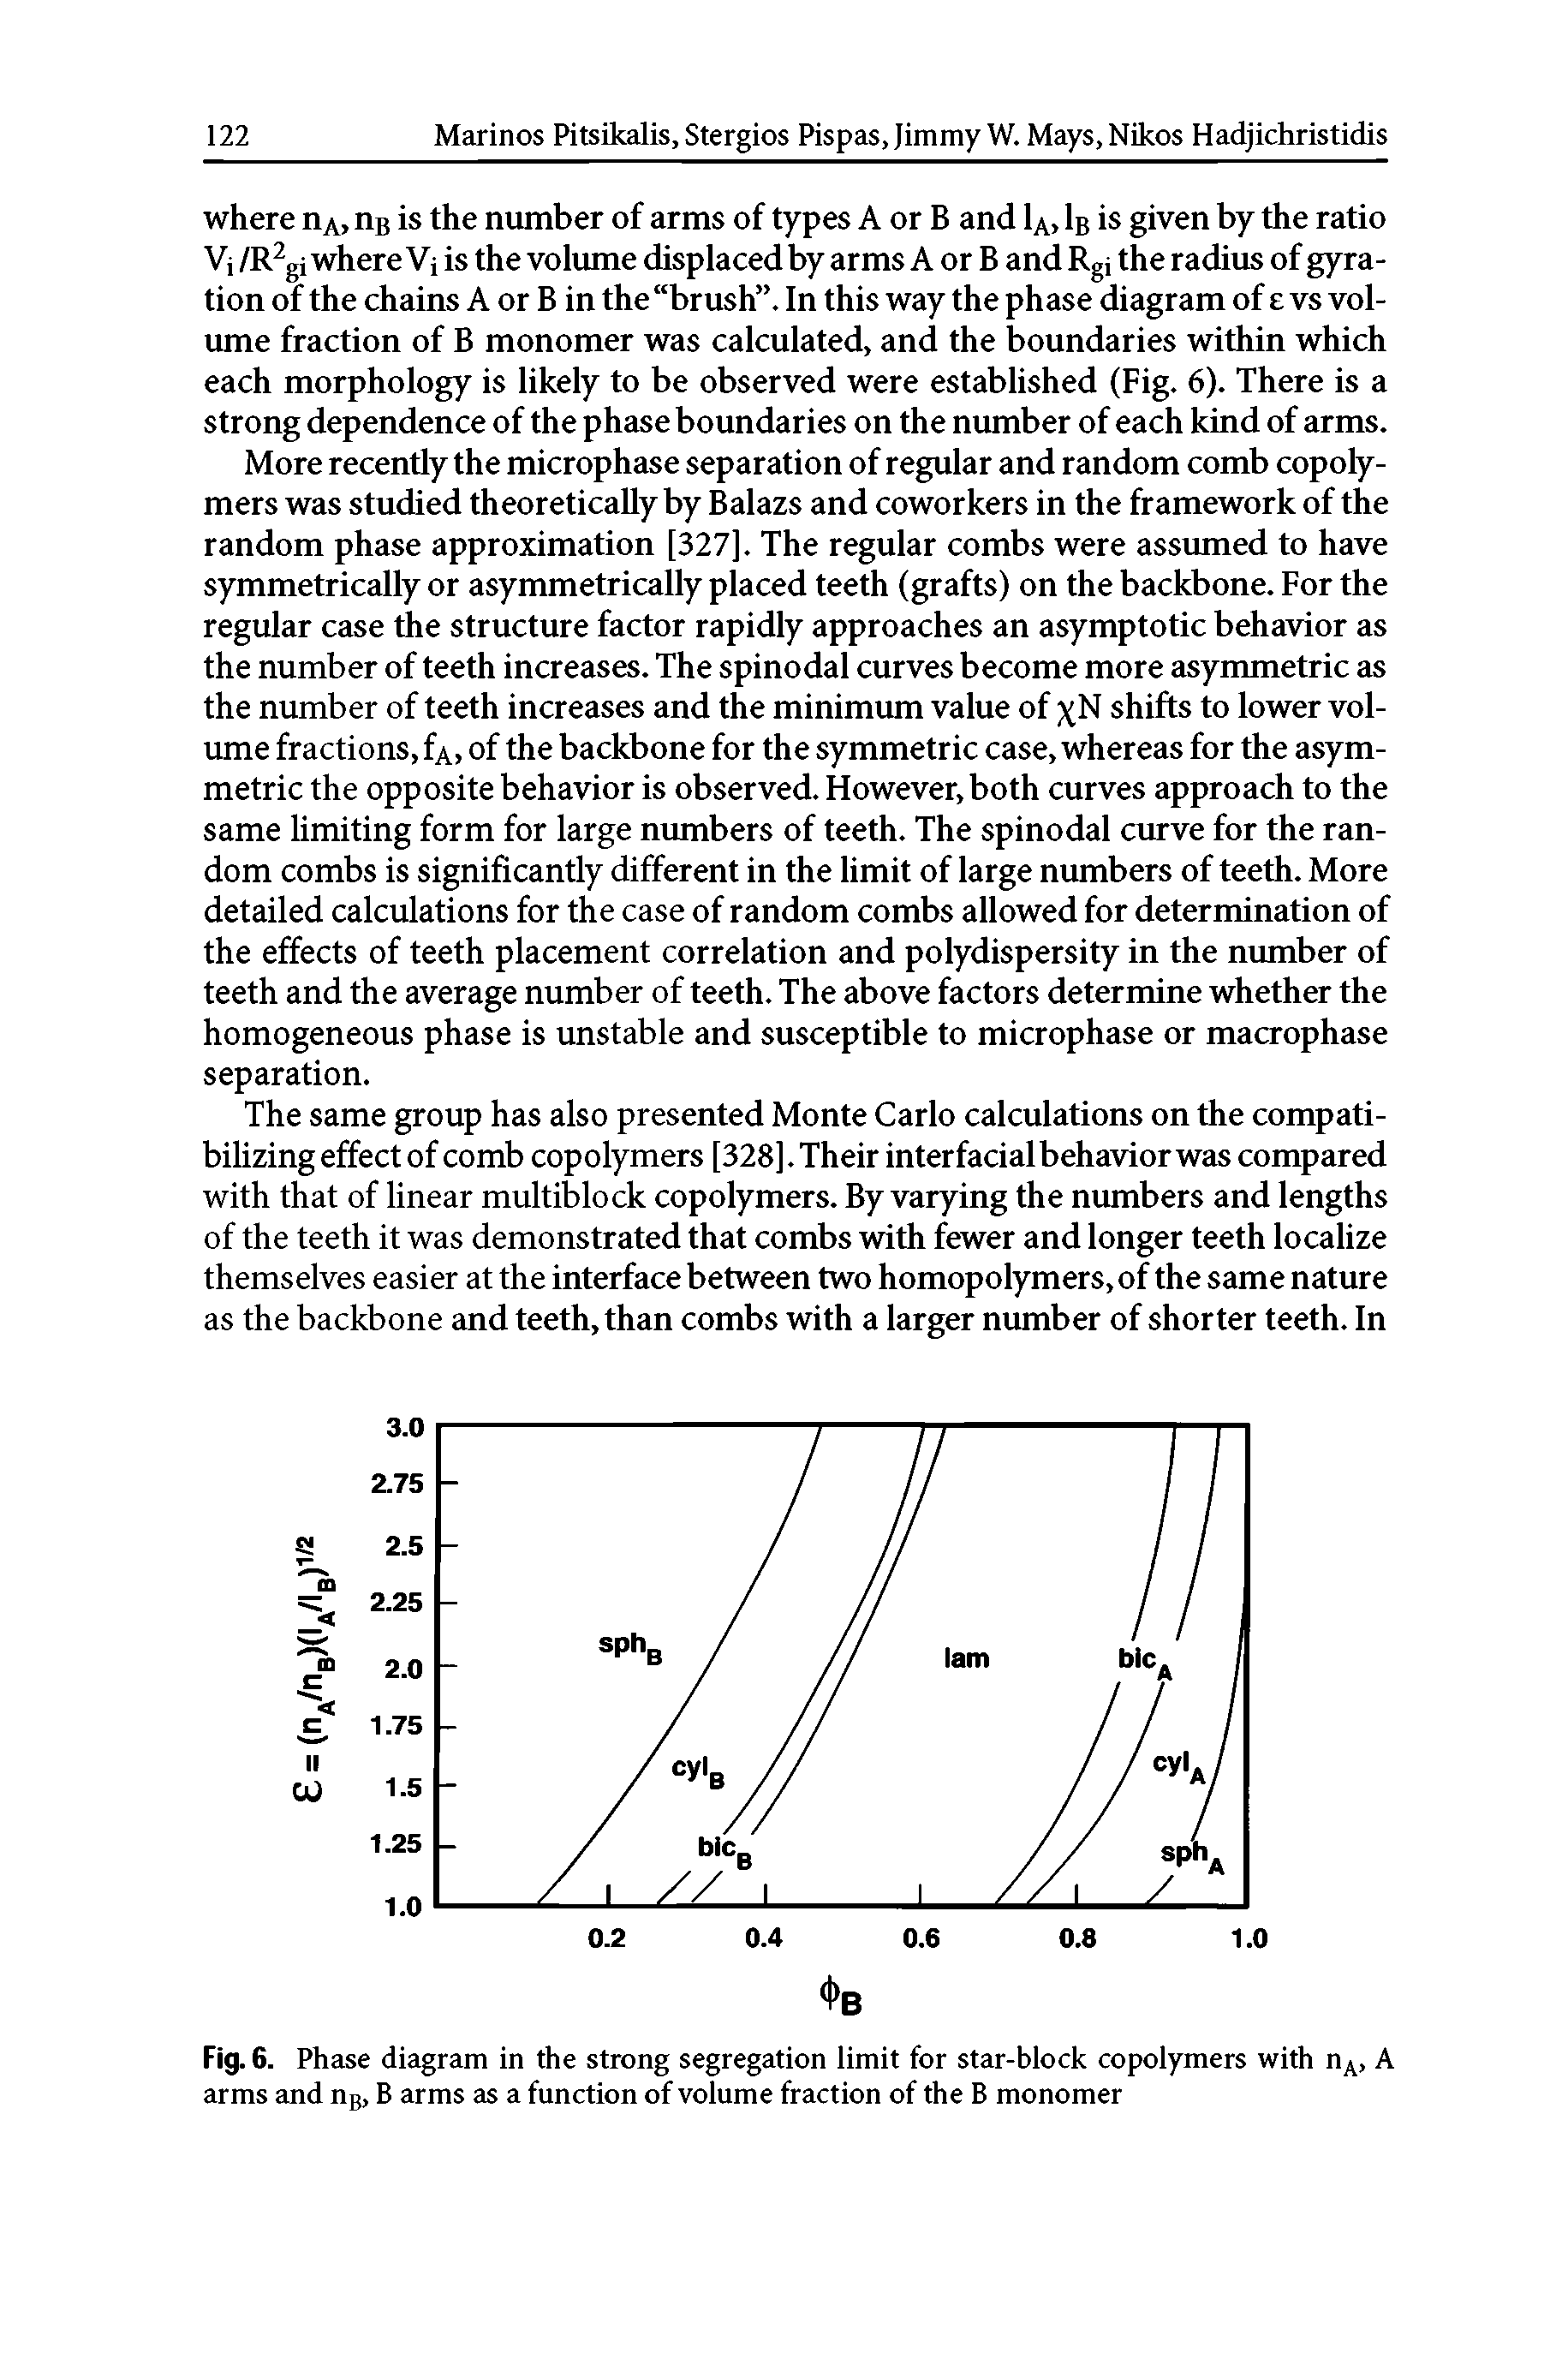 Fig. 6. Phase diagram in the strong segregation limit for star-block copolymers with nA, A arms and nB, B arms as a function of volume fraction of the B monomer...